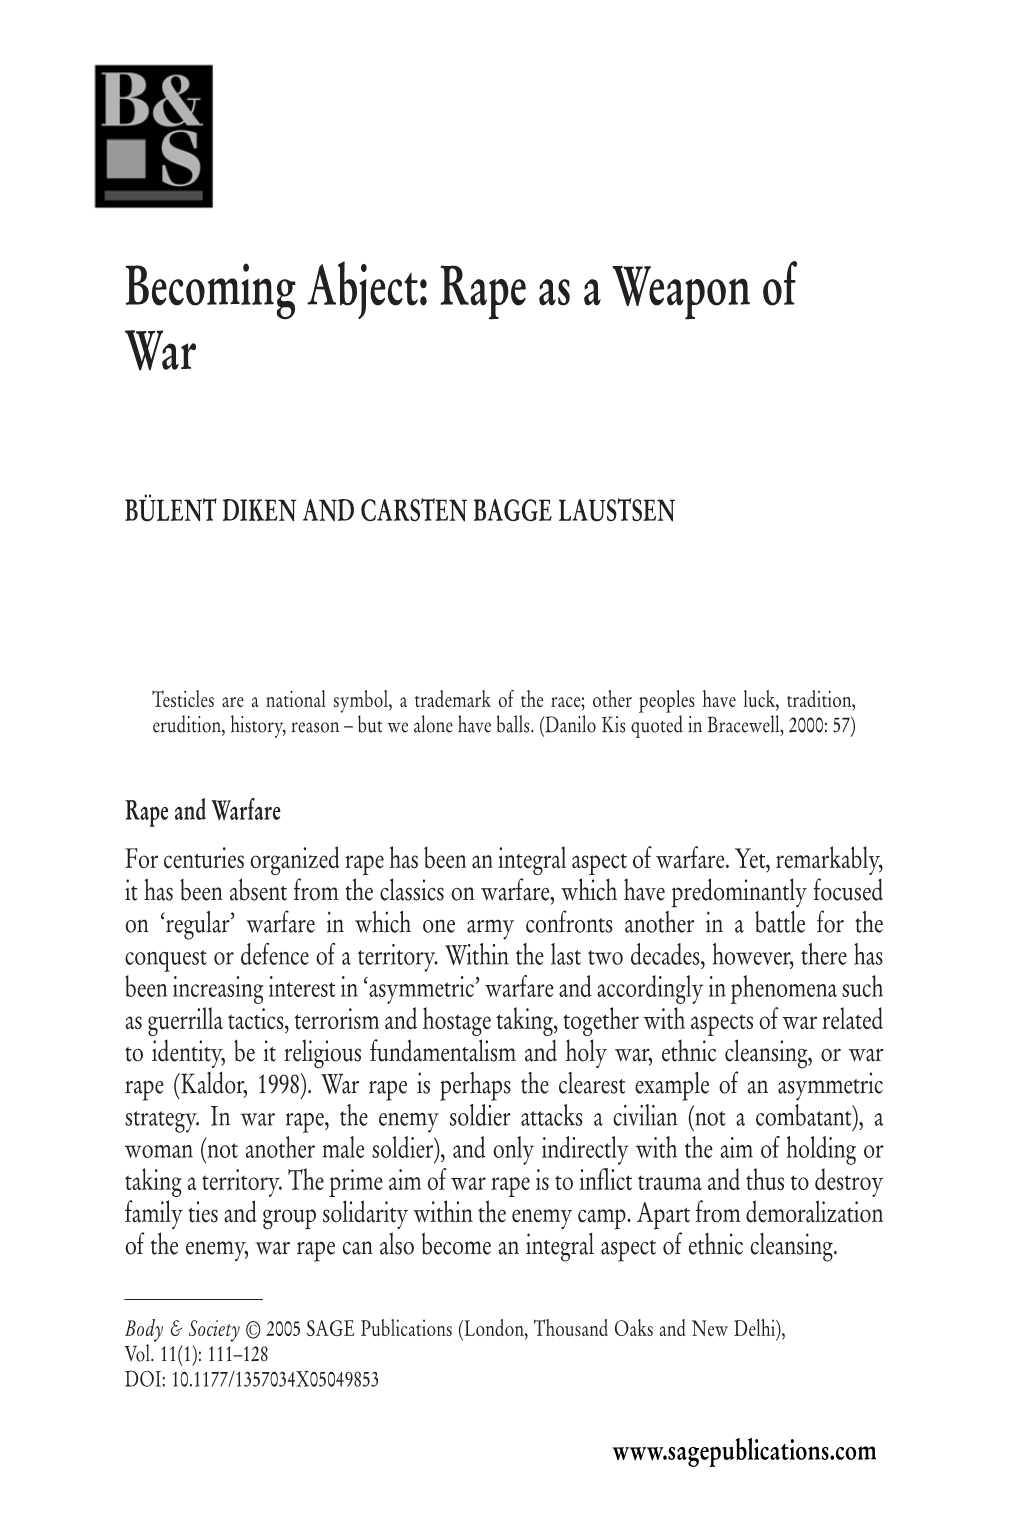 Becoming Abject: Rape As a Weapon of War